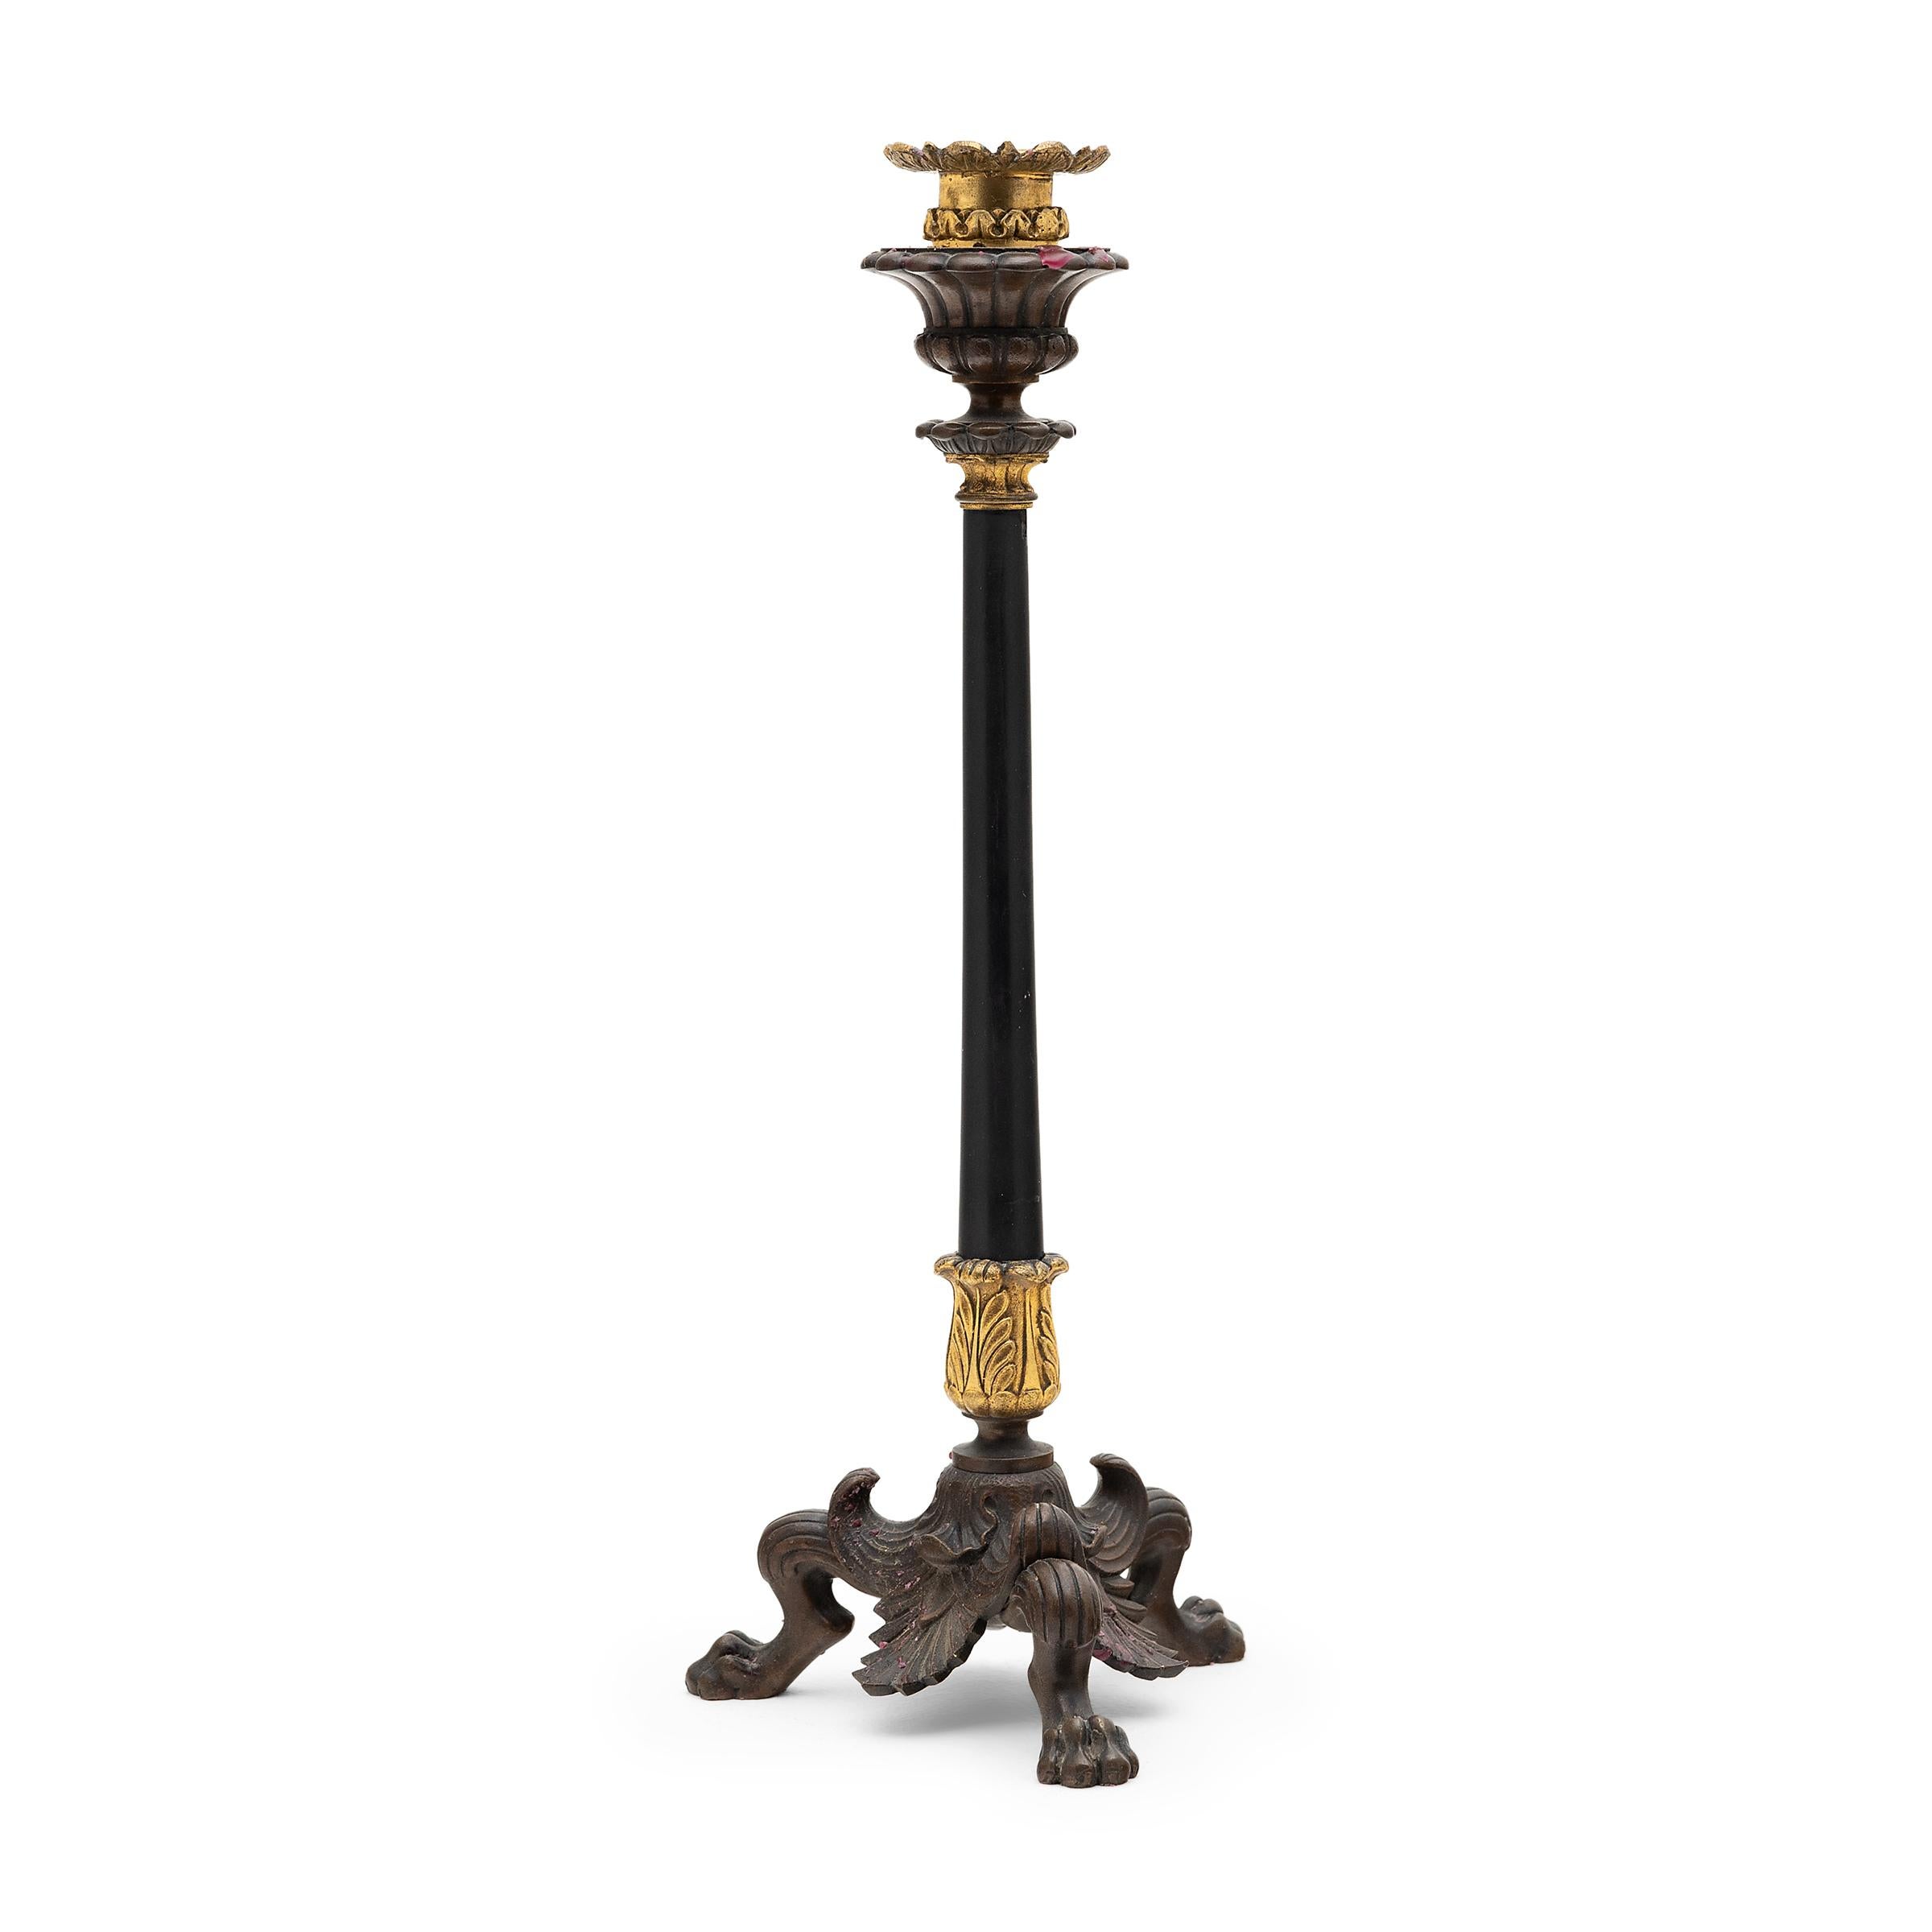 This regal pair of bronze and slate candlesticks originated in 19th-century France and are beautifully detailed with molded and gilt embellishments. Crafted in the style of Empire furniture, each candlestick rests on a triform bronze base of claw